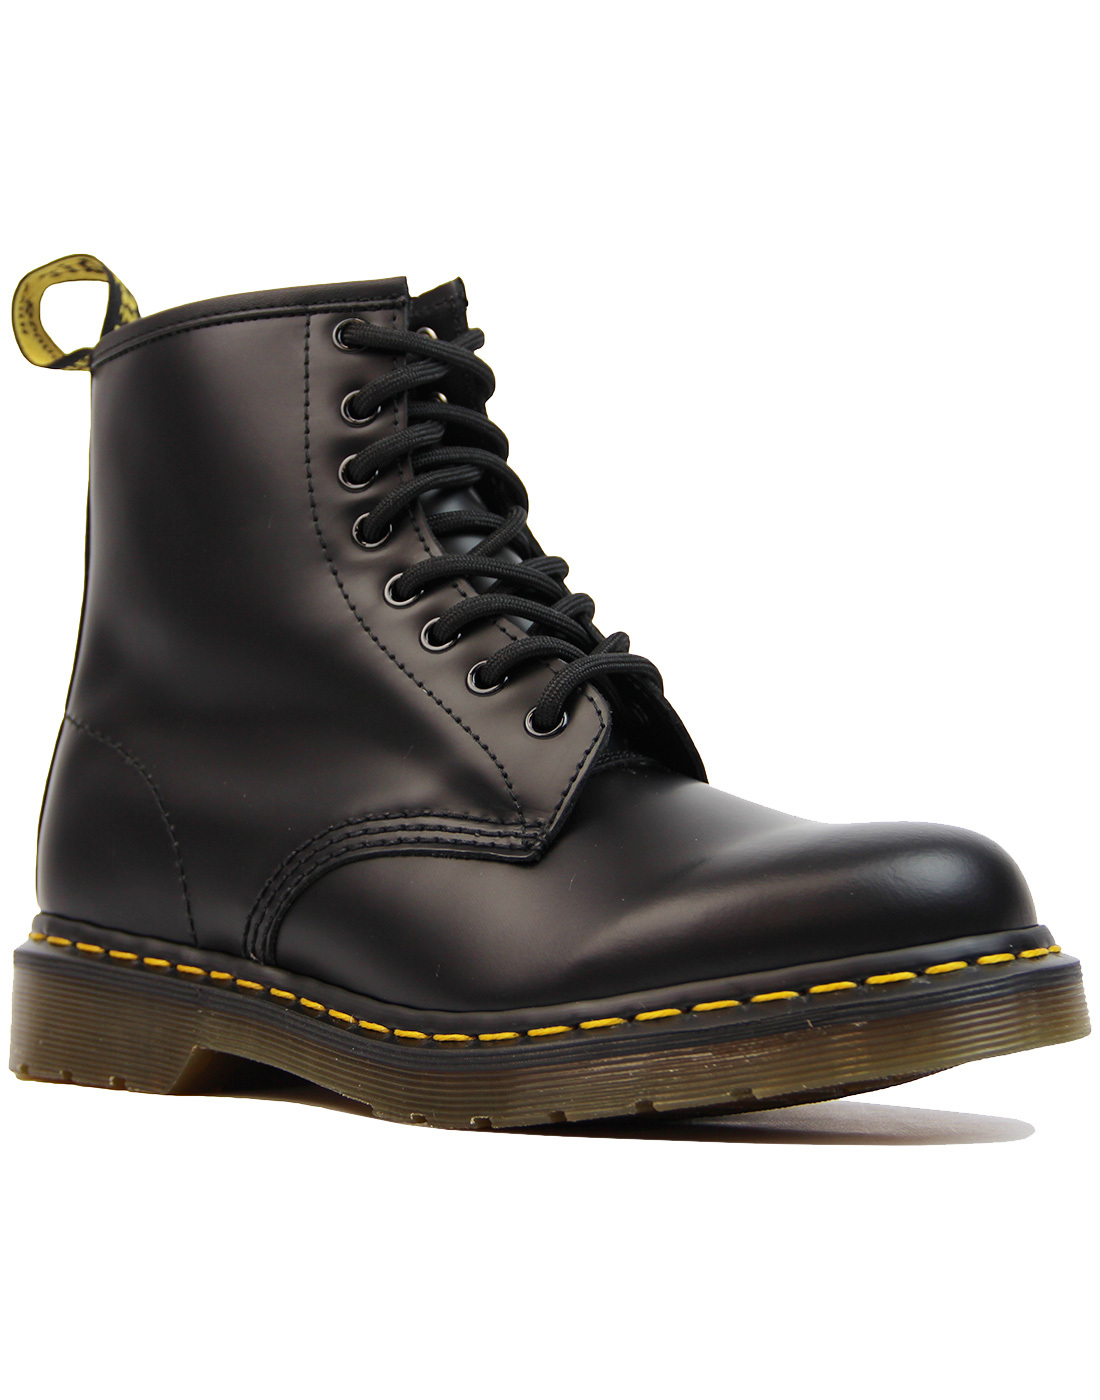 DR MARTENS 1460 Womens Retro Mod Smooth Leather Boots in Black